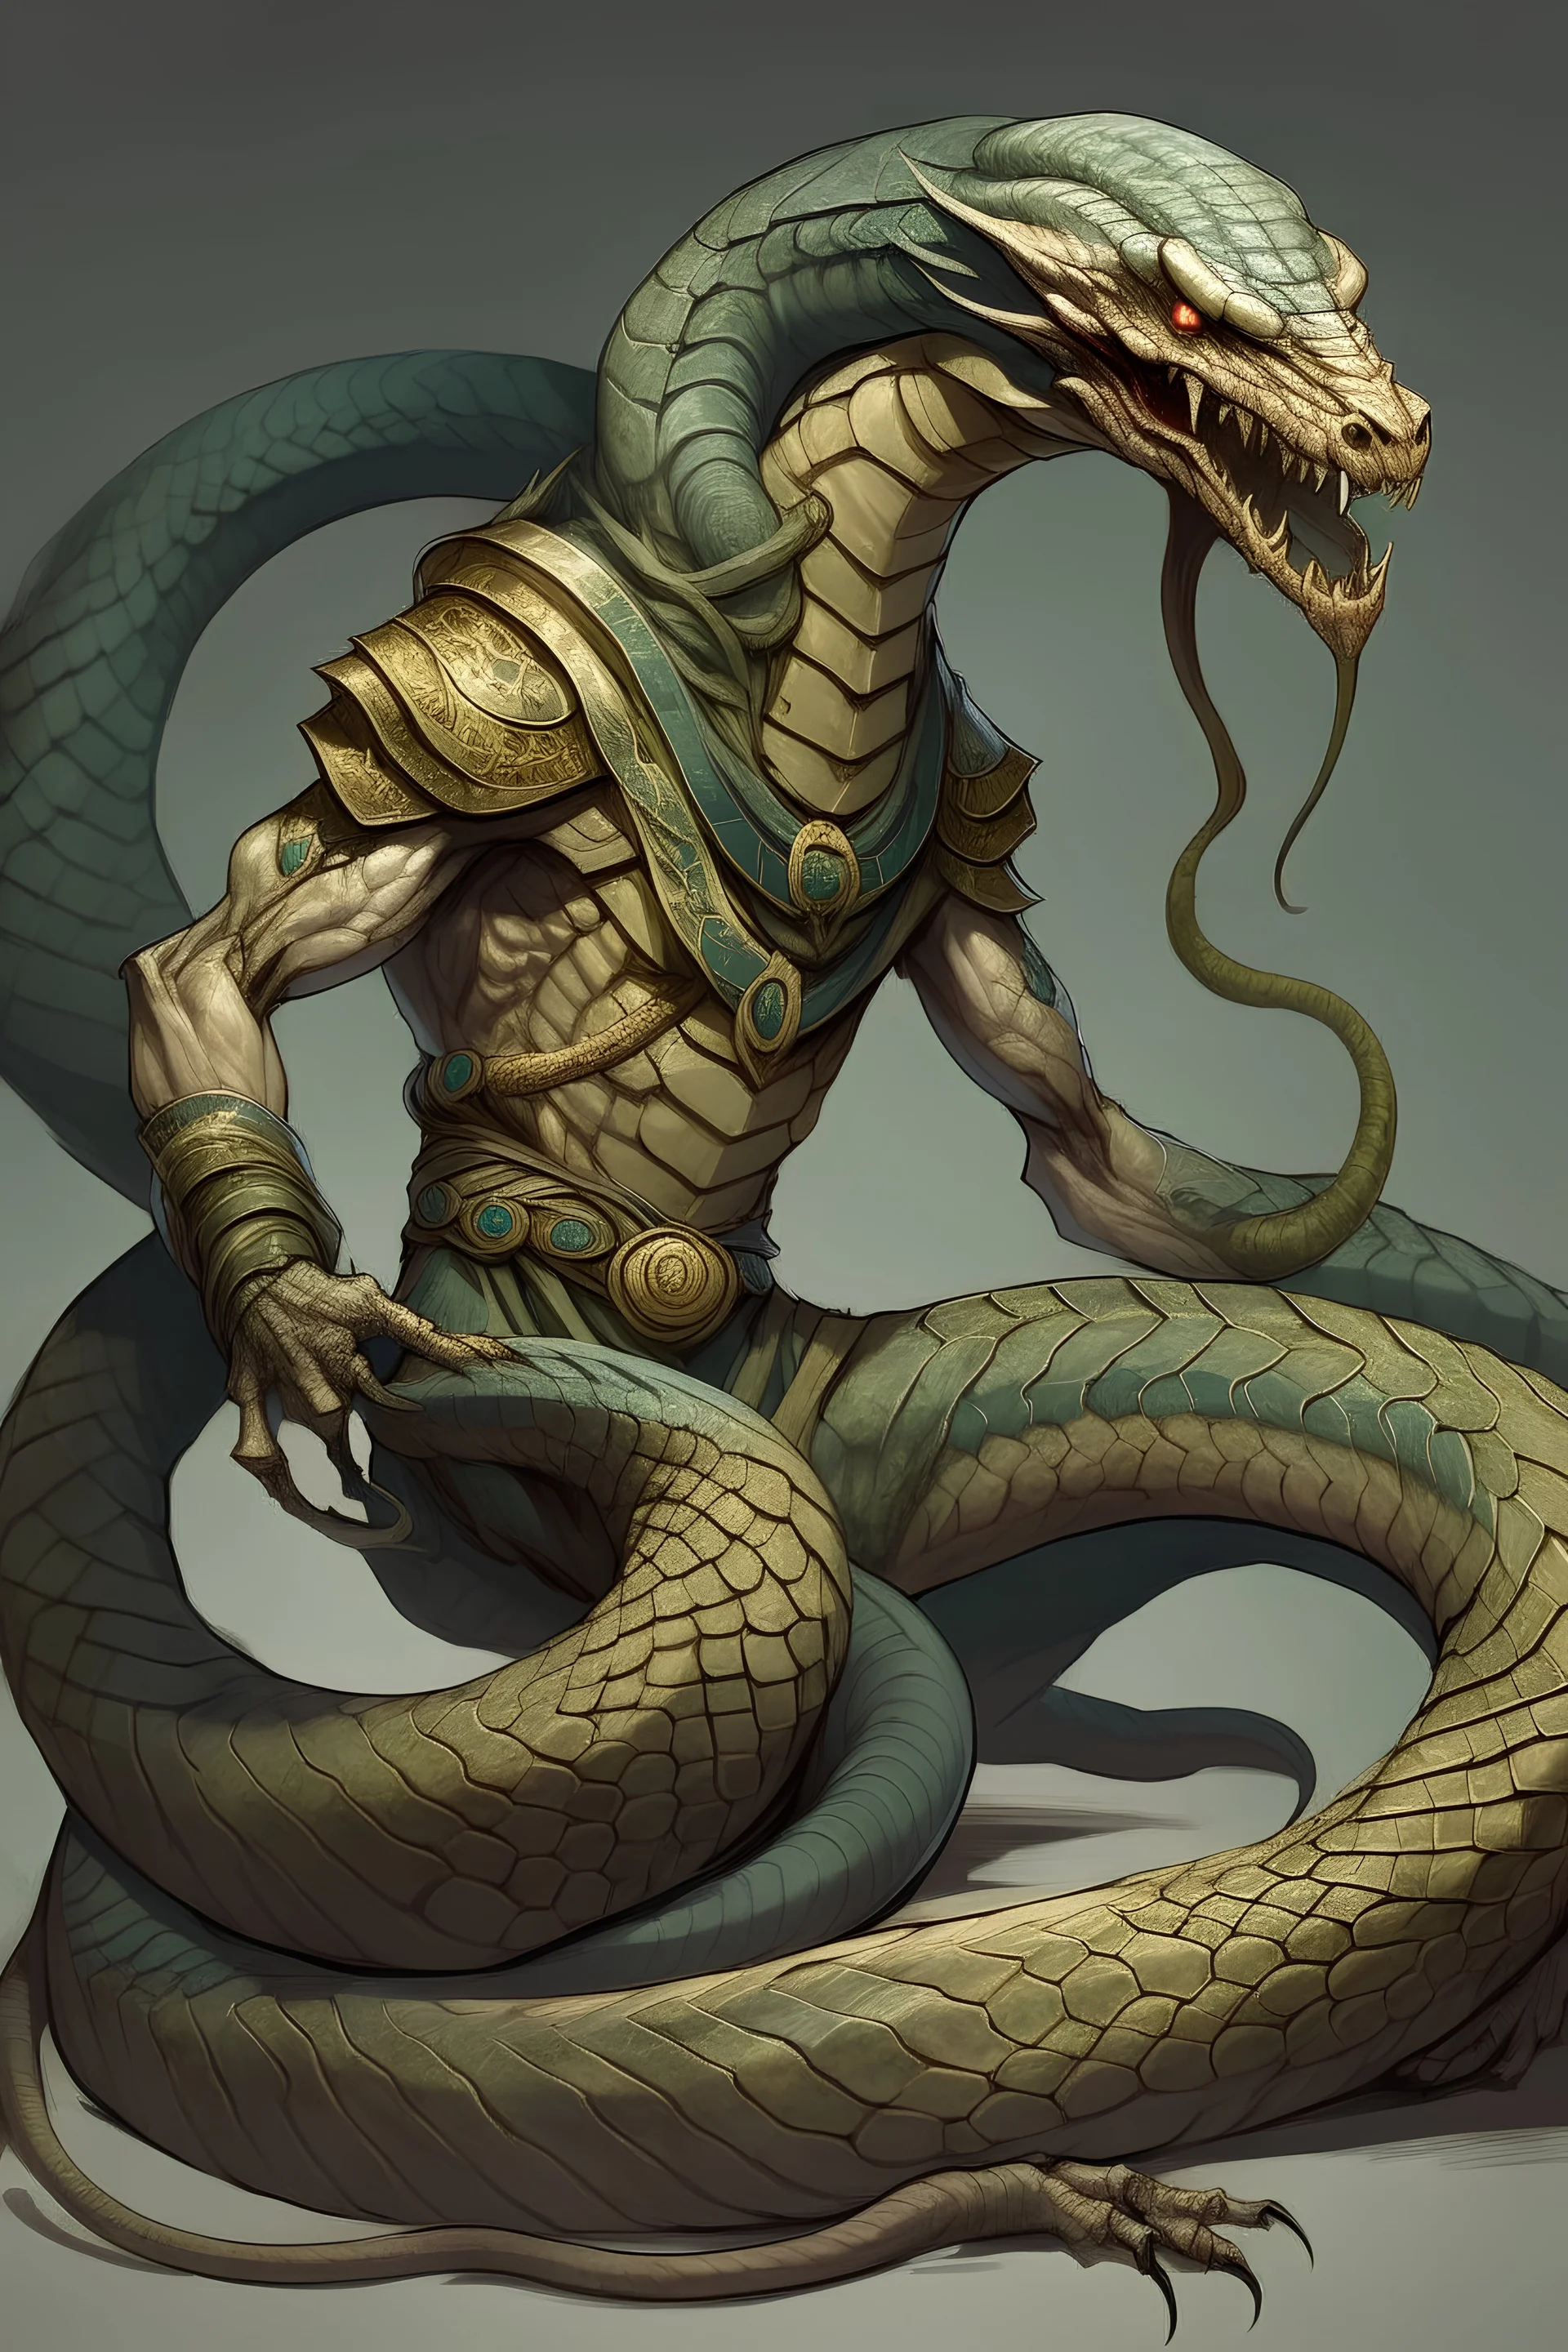 A great humanoid serpent with the lower-body of a serpent.